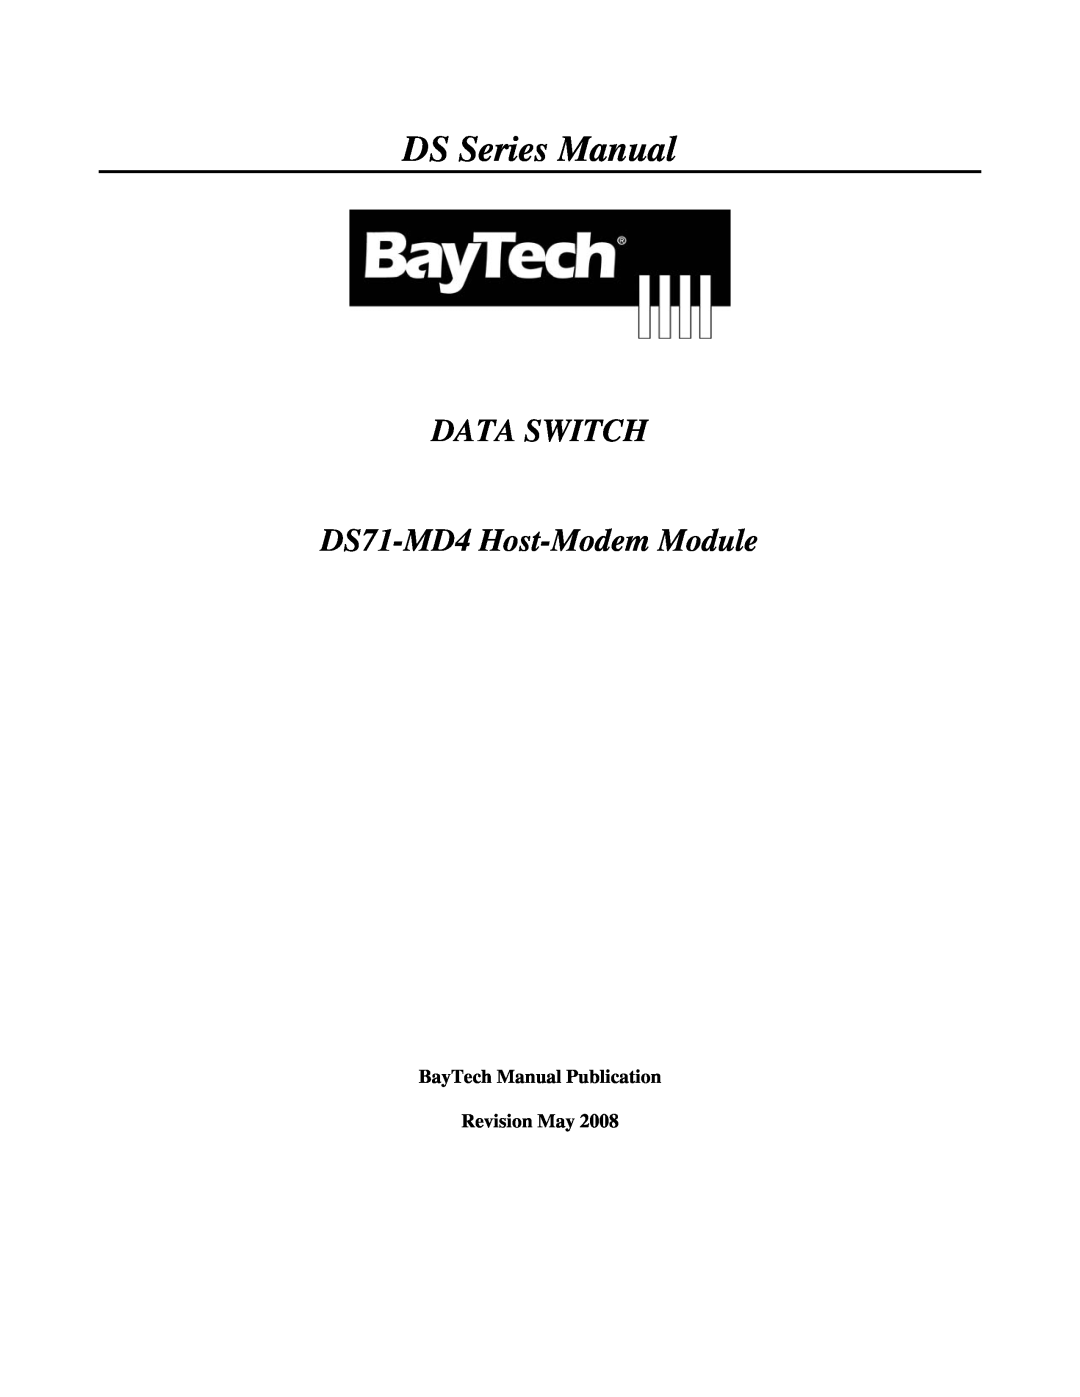 Cisco Systems manual DS Series Manual, DATA SWITCH DS71-MD4 Host-Modem Module, BayTech Manual Publication Revision May 